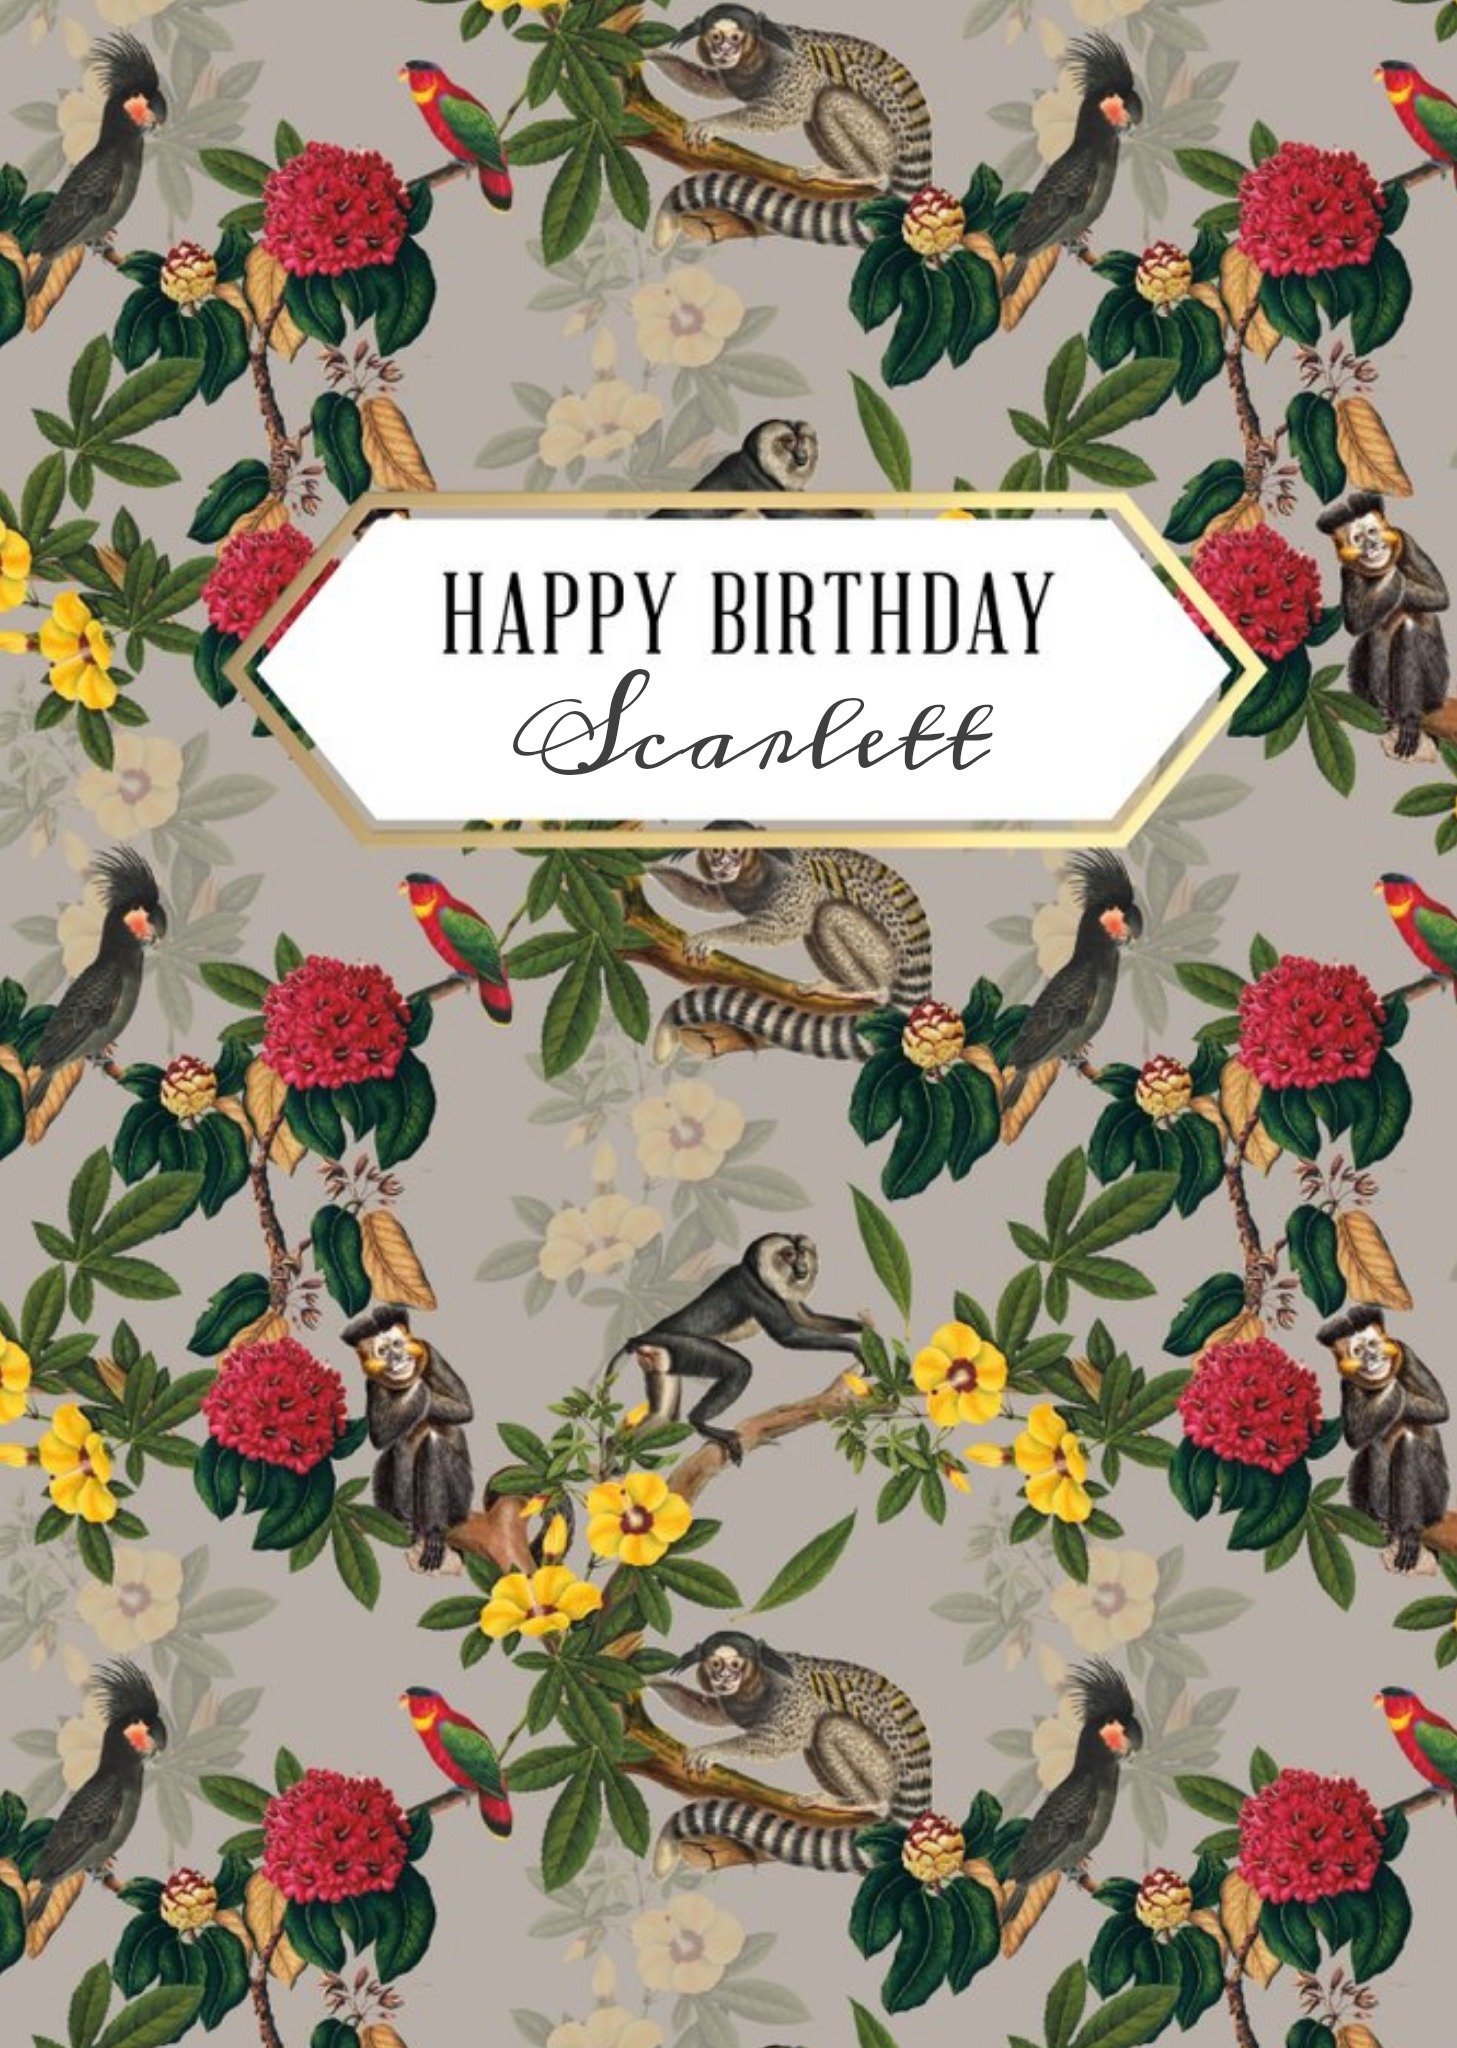 The Natural History Museum Natural History Museum Happy Birthday Floral Lemur Card, Large